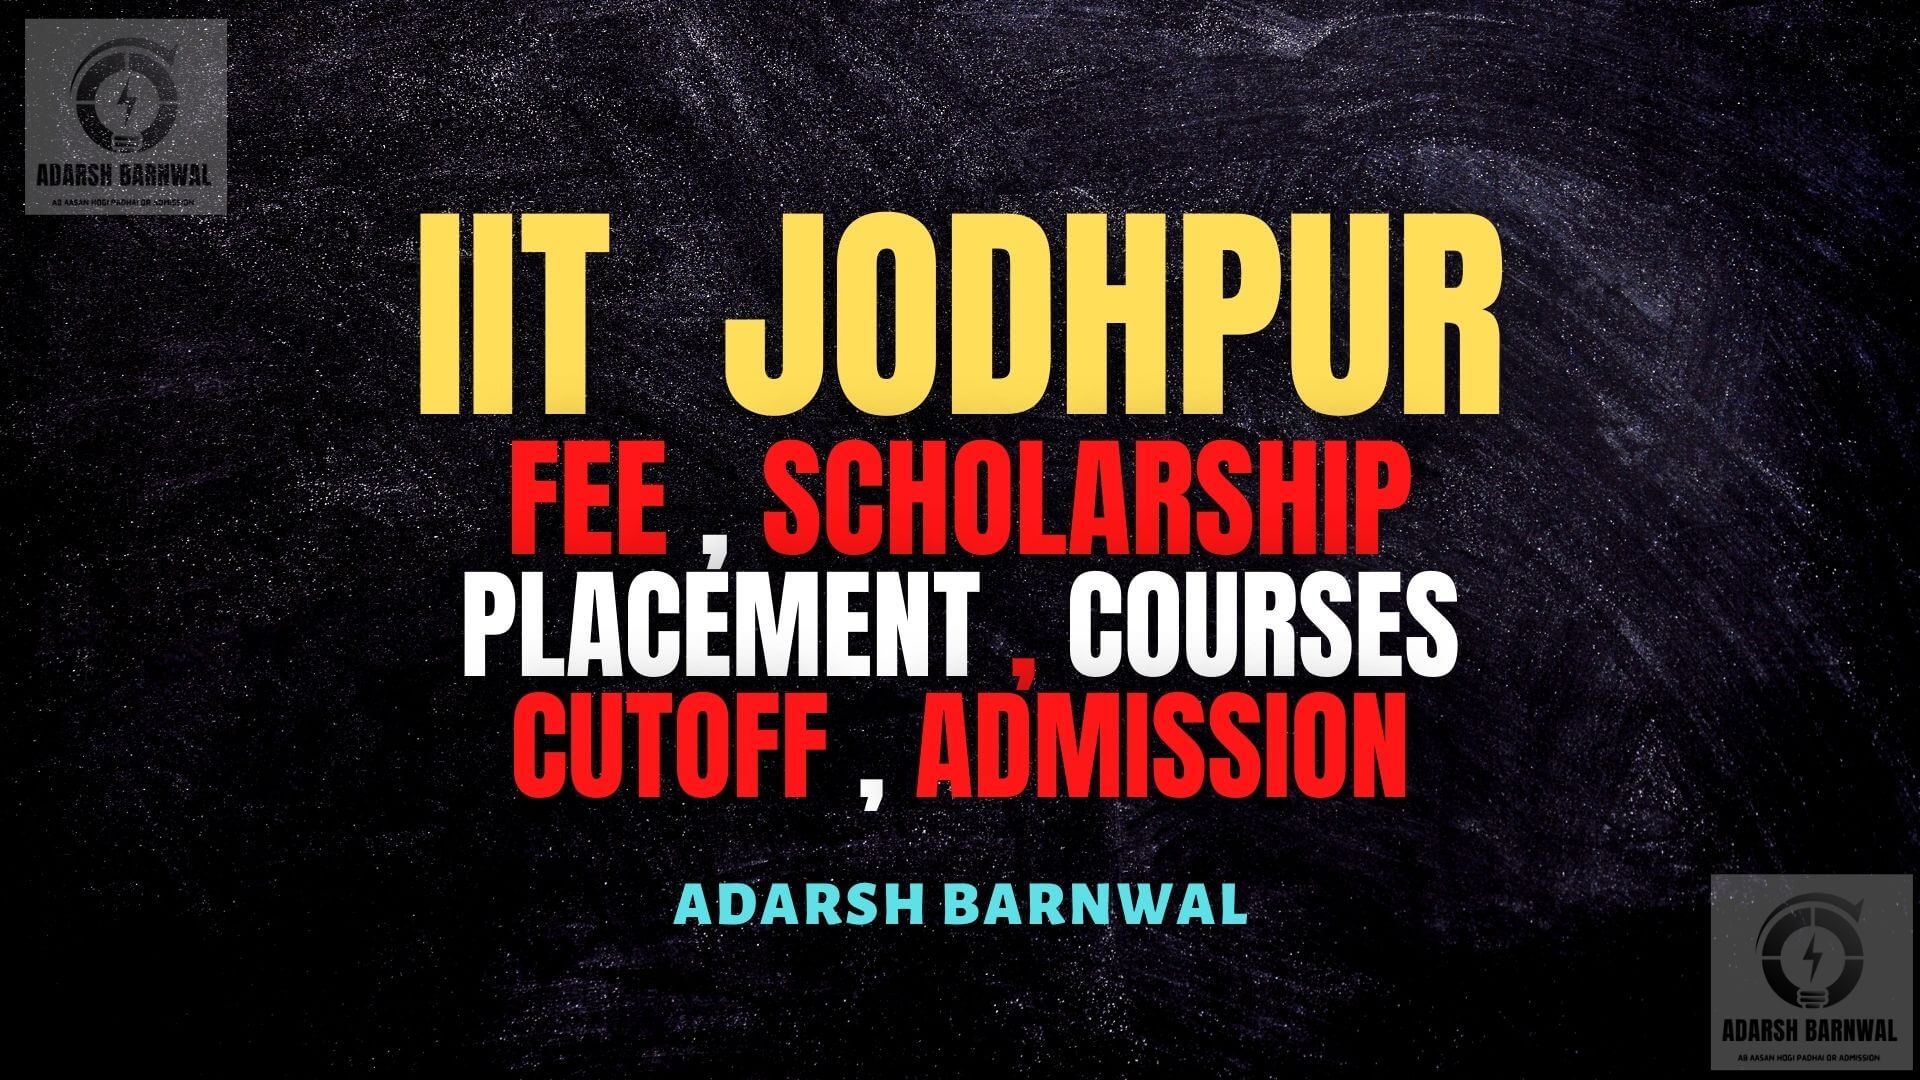 IIT Jodhpur : Cutoff, Fees, Placement, Ranking, Courses, Admission 2023-2024